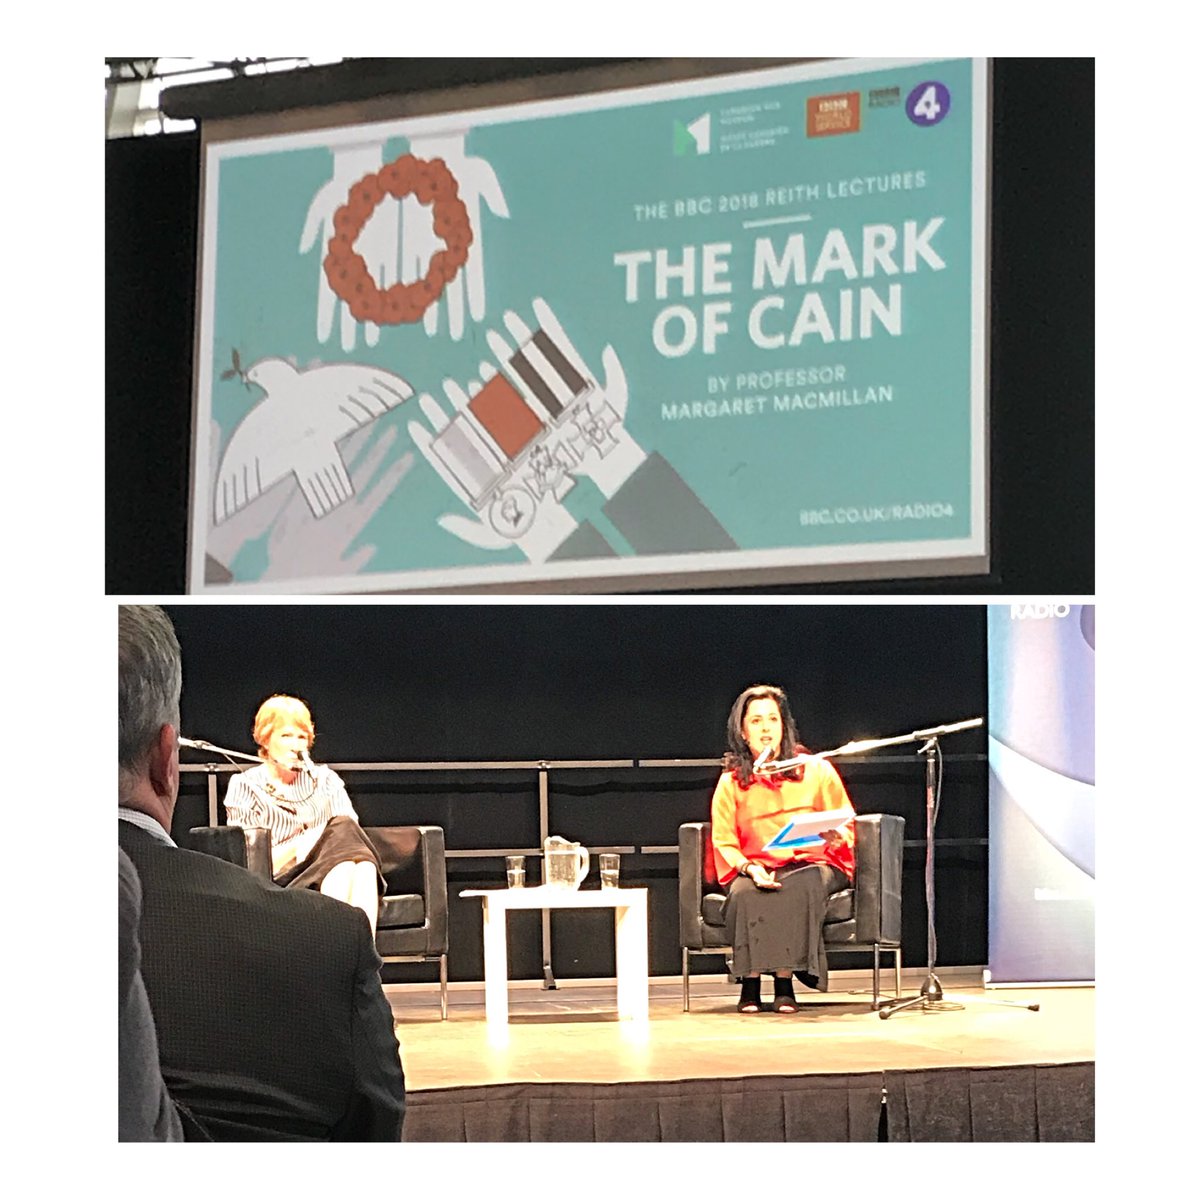 BrillIant and thought provoking lecture tonight in #Ottawa with Prof #MargaretMacmillan and chaired by @tweeter_anita. #Reith ⁦@BBC_CurrAff⁩ ⁦@BBCRadio4⁩